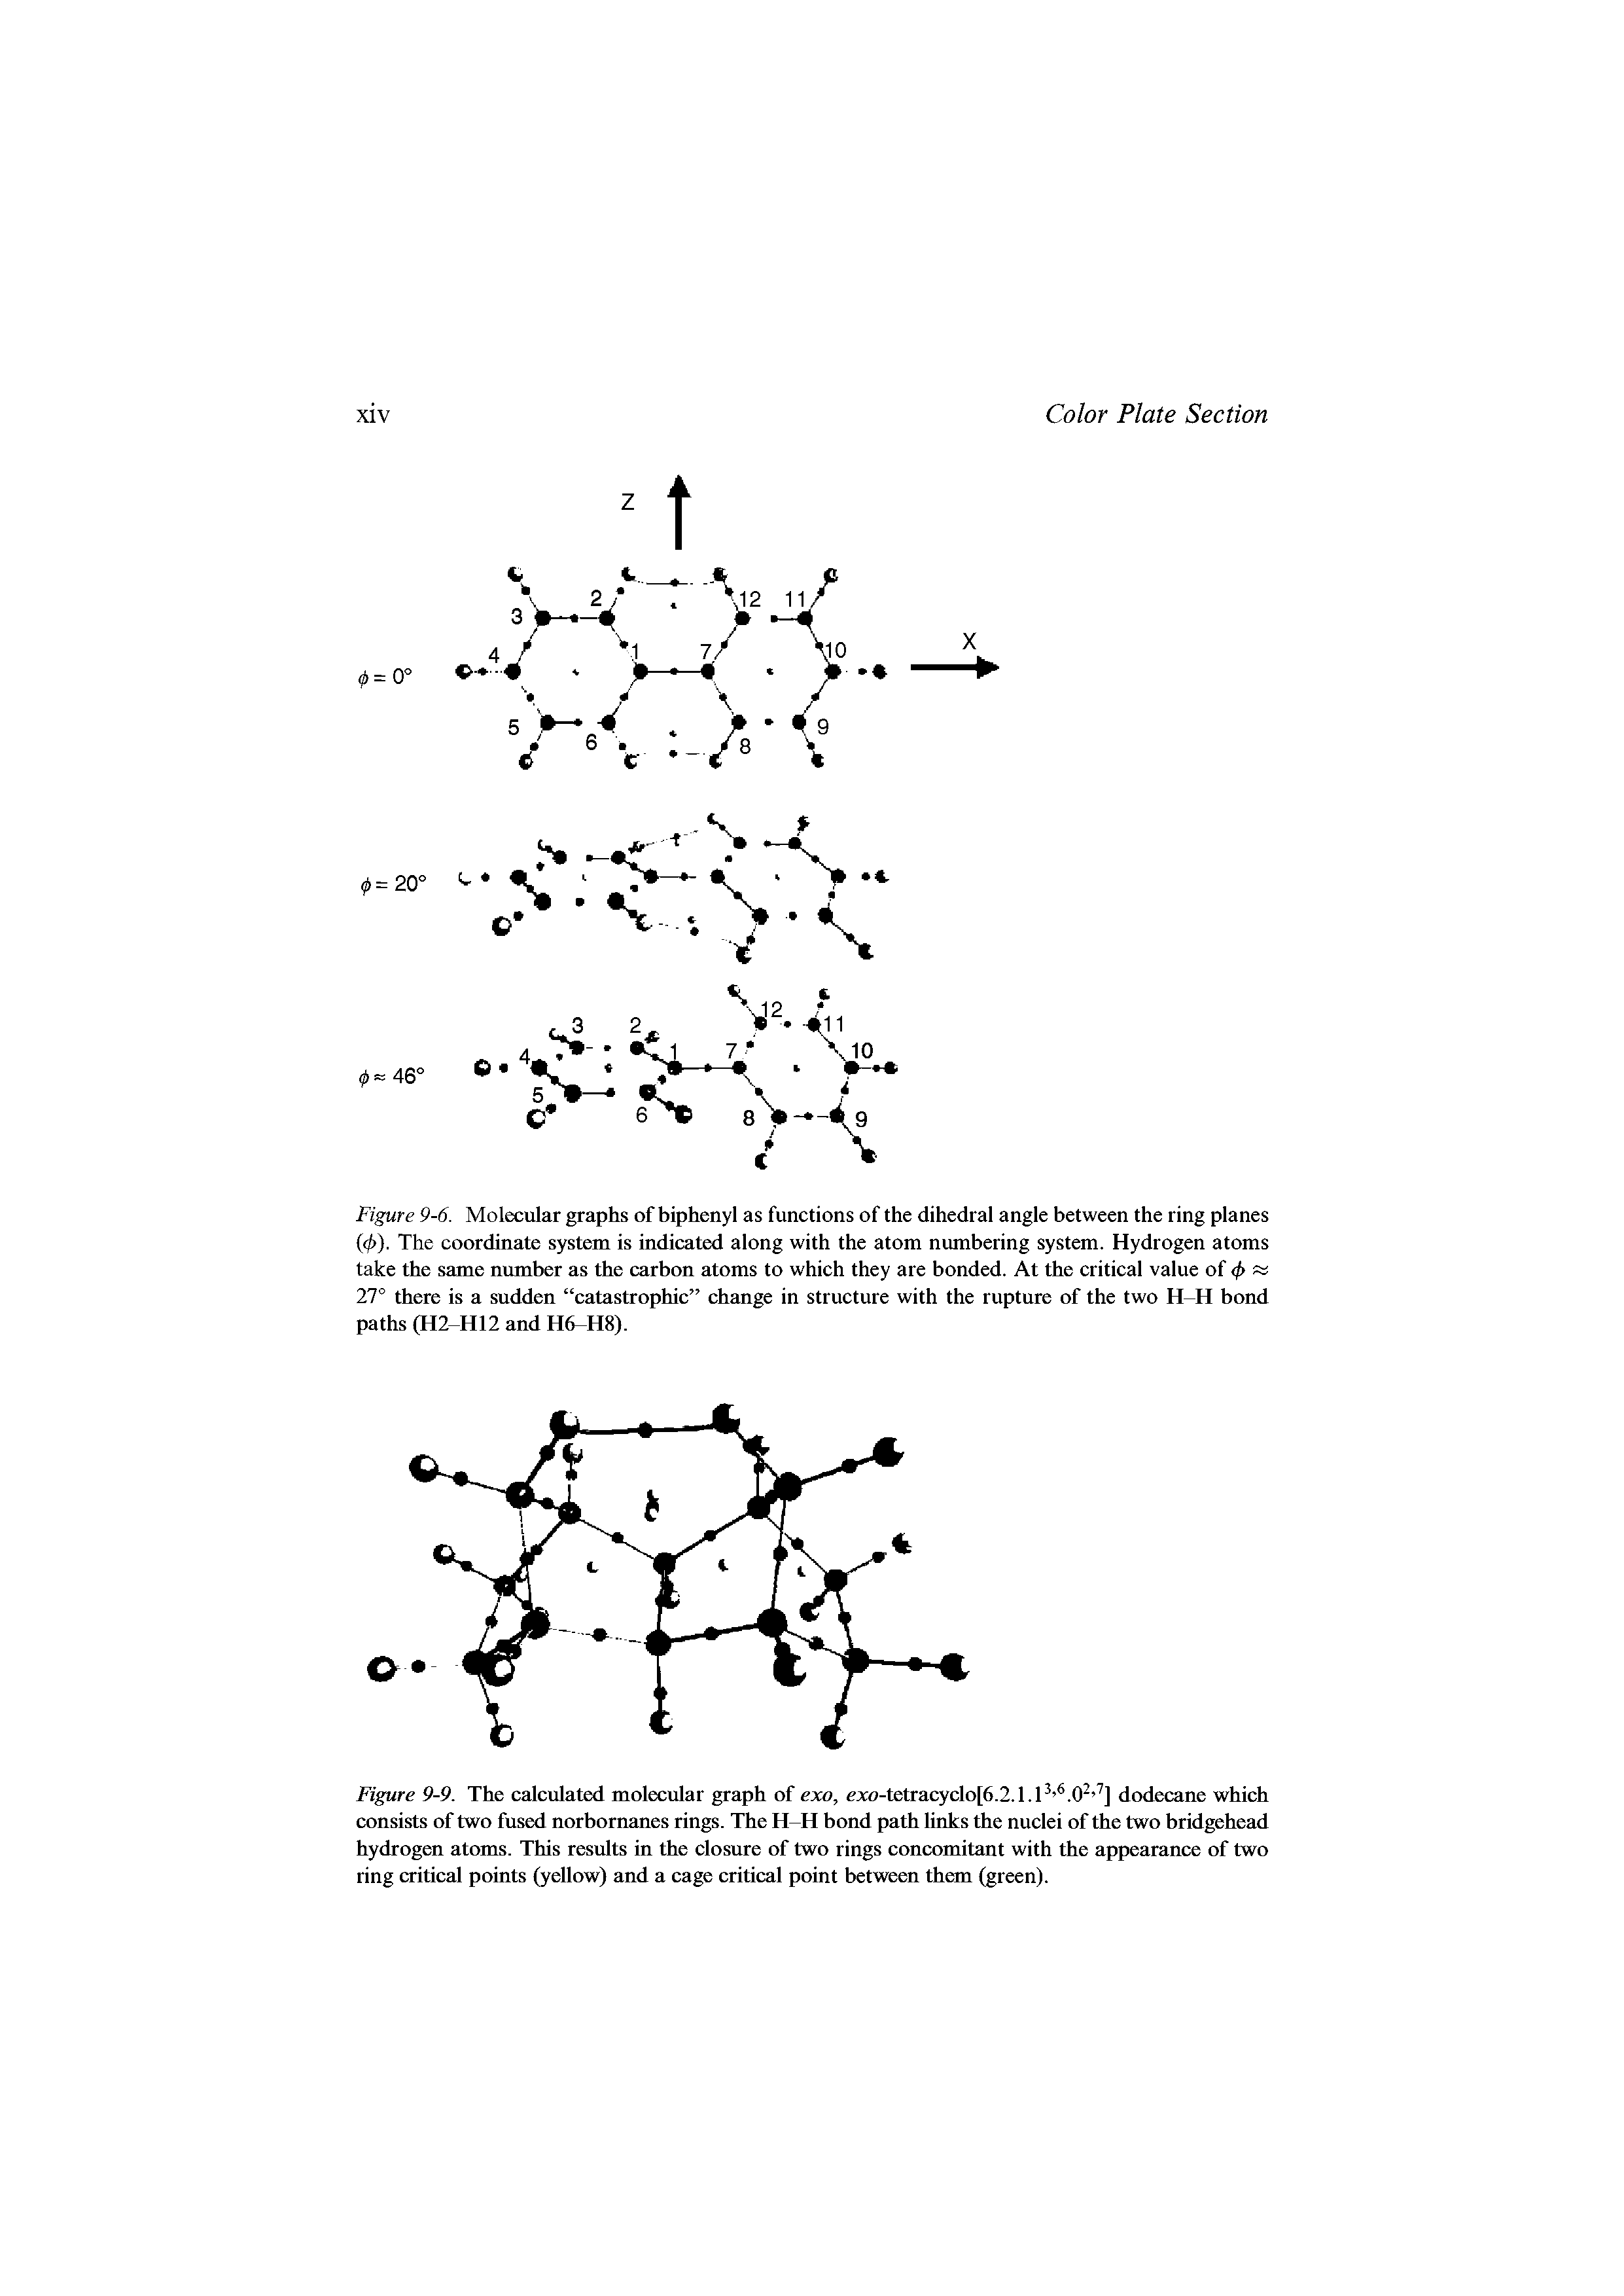 Figure 9-9. The calculated molecular graph of exo, exo-tetracyclo[6.2.1.P . 0 ] dodecane which consists of two fused norbornanes rings. The H-H bond path links the nuclei of the two bridgehead hydrogen atoms. This results in the closure of two rings concomitant with the appearance of two ring critical points (yellow) and a cage critical point between them (green).